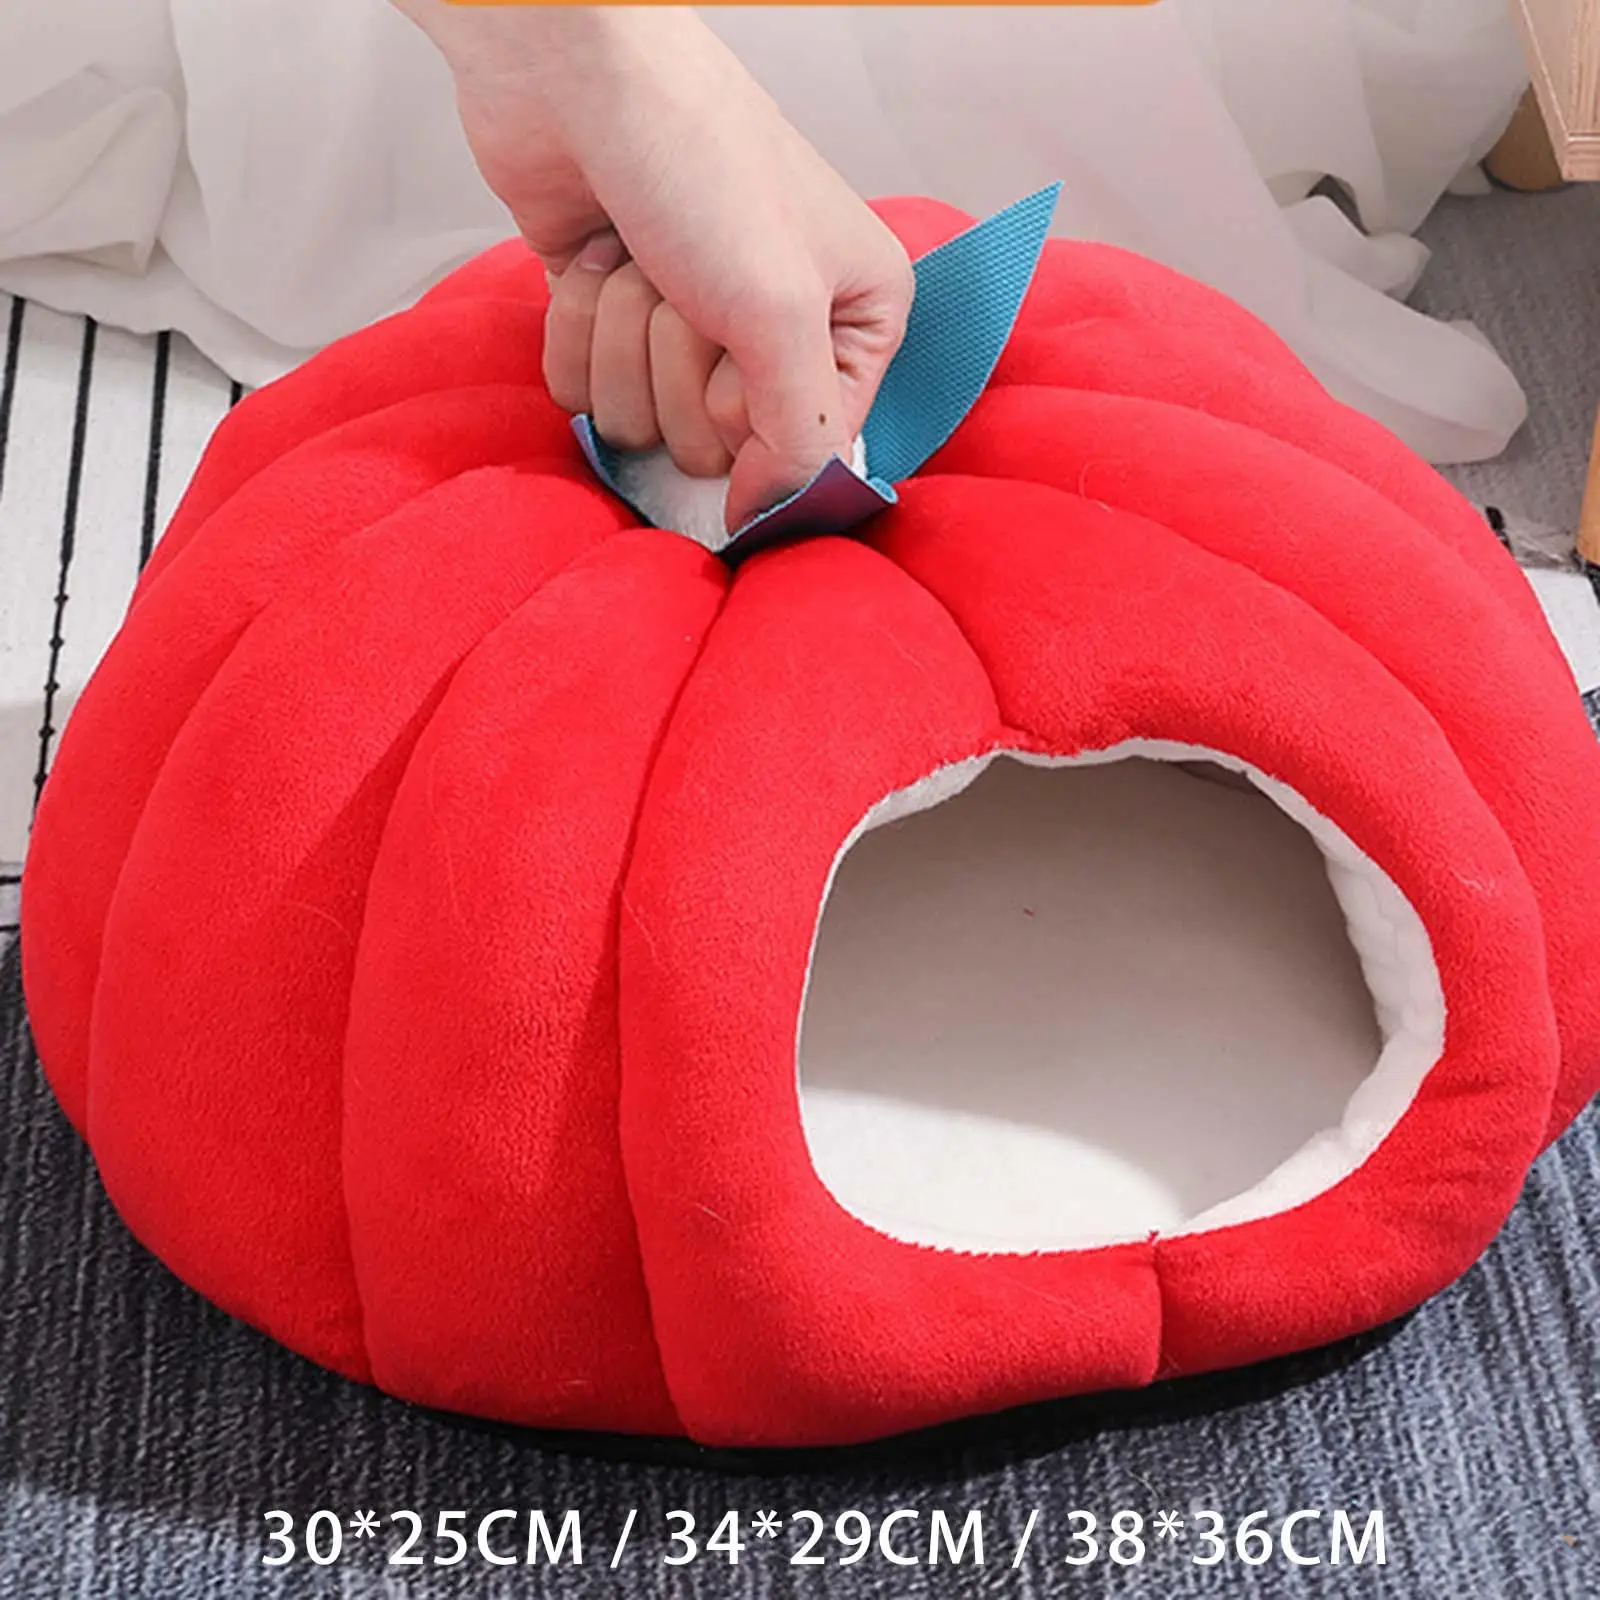 Cat Bed Plush Nonslip Bottom Fully Enclosed No Deformation Pet Bed Pumpkin Shape Soft Small Pet Bed Small Animals Bed